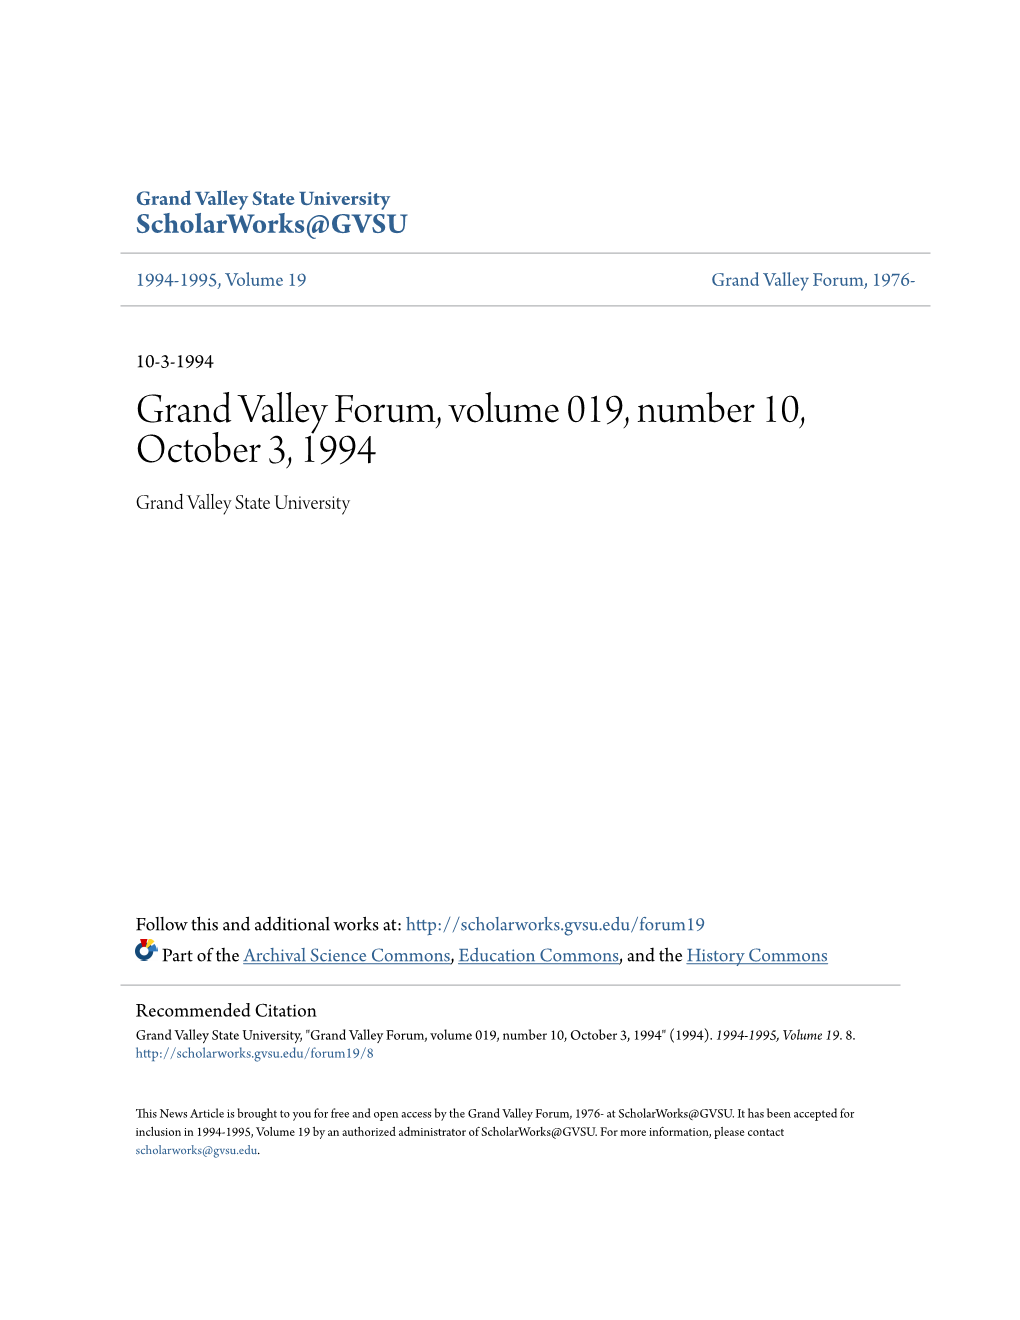 Grand Valley Forum, Volume 019, Number 10, October 3, 1994 Grand Valley State University